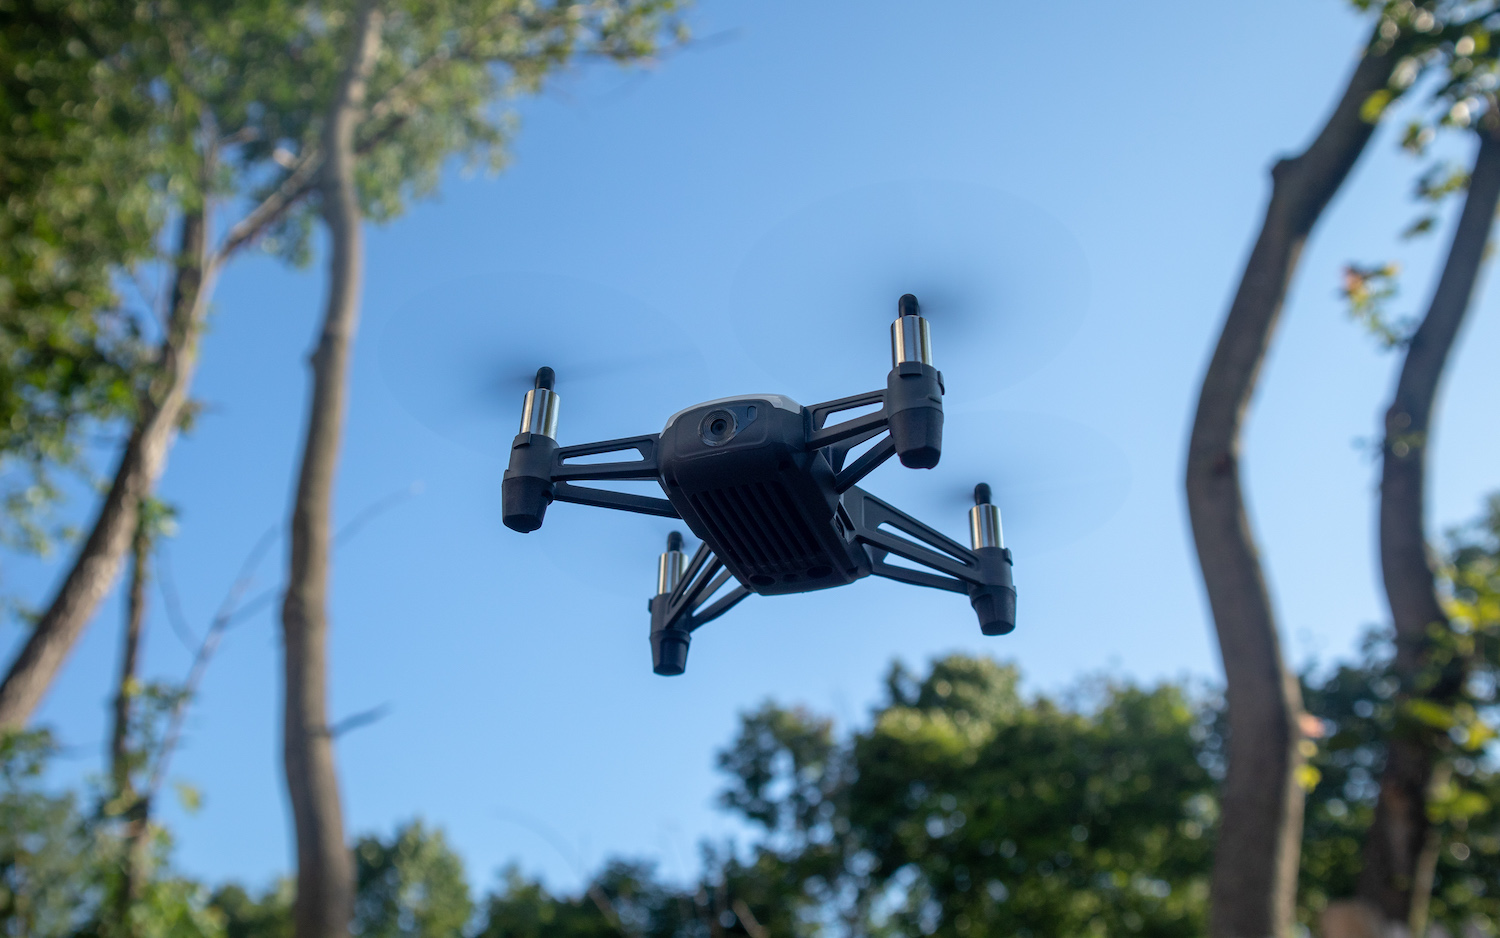 Ryze Tech Tello Drone Review: Fun Goes Only So Far | Tom's Guide